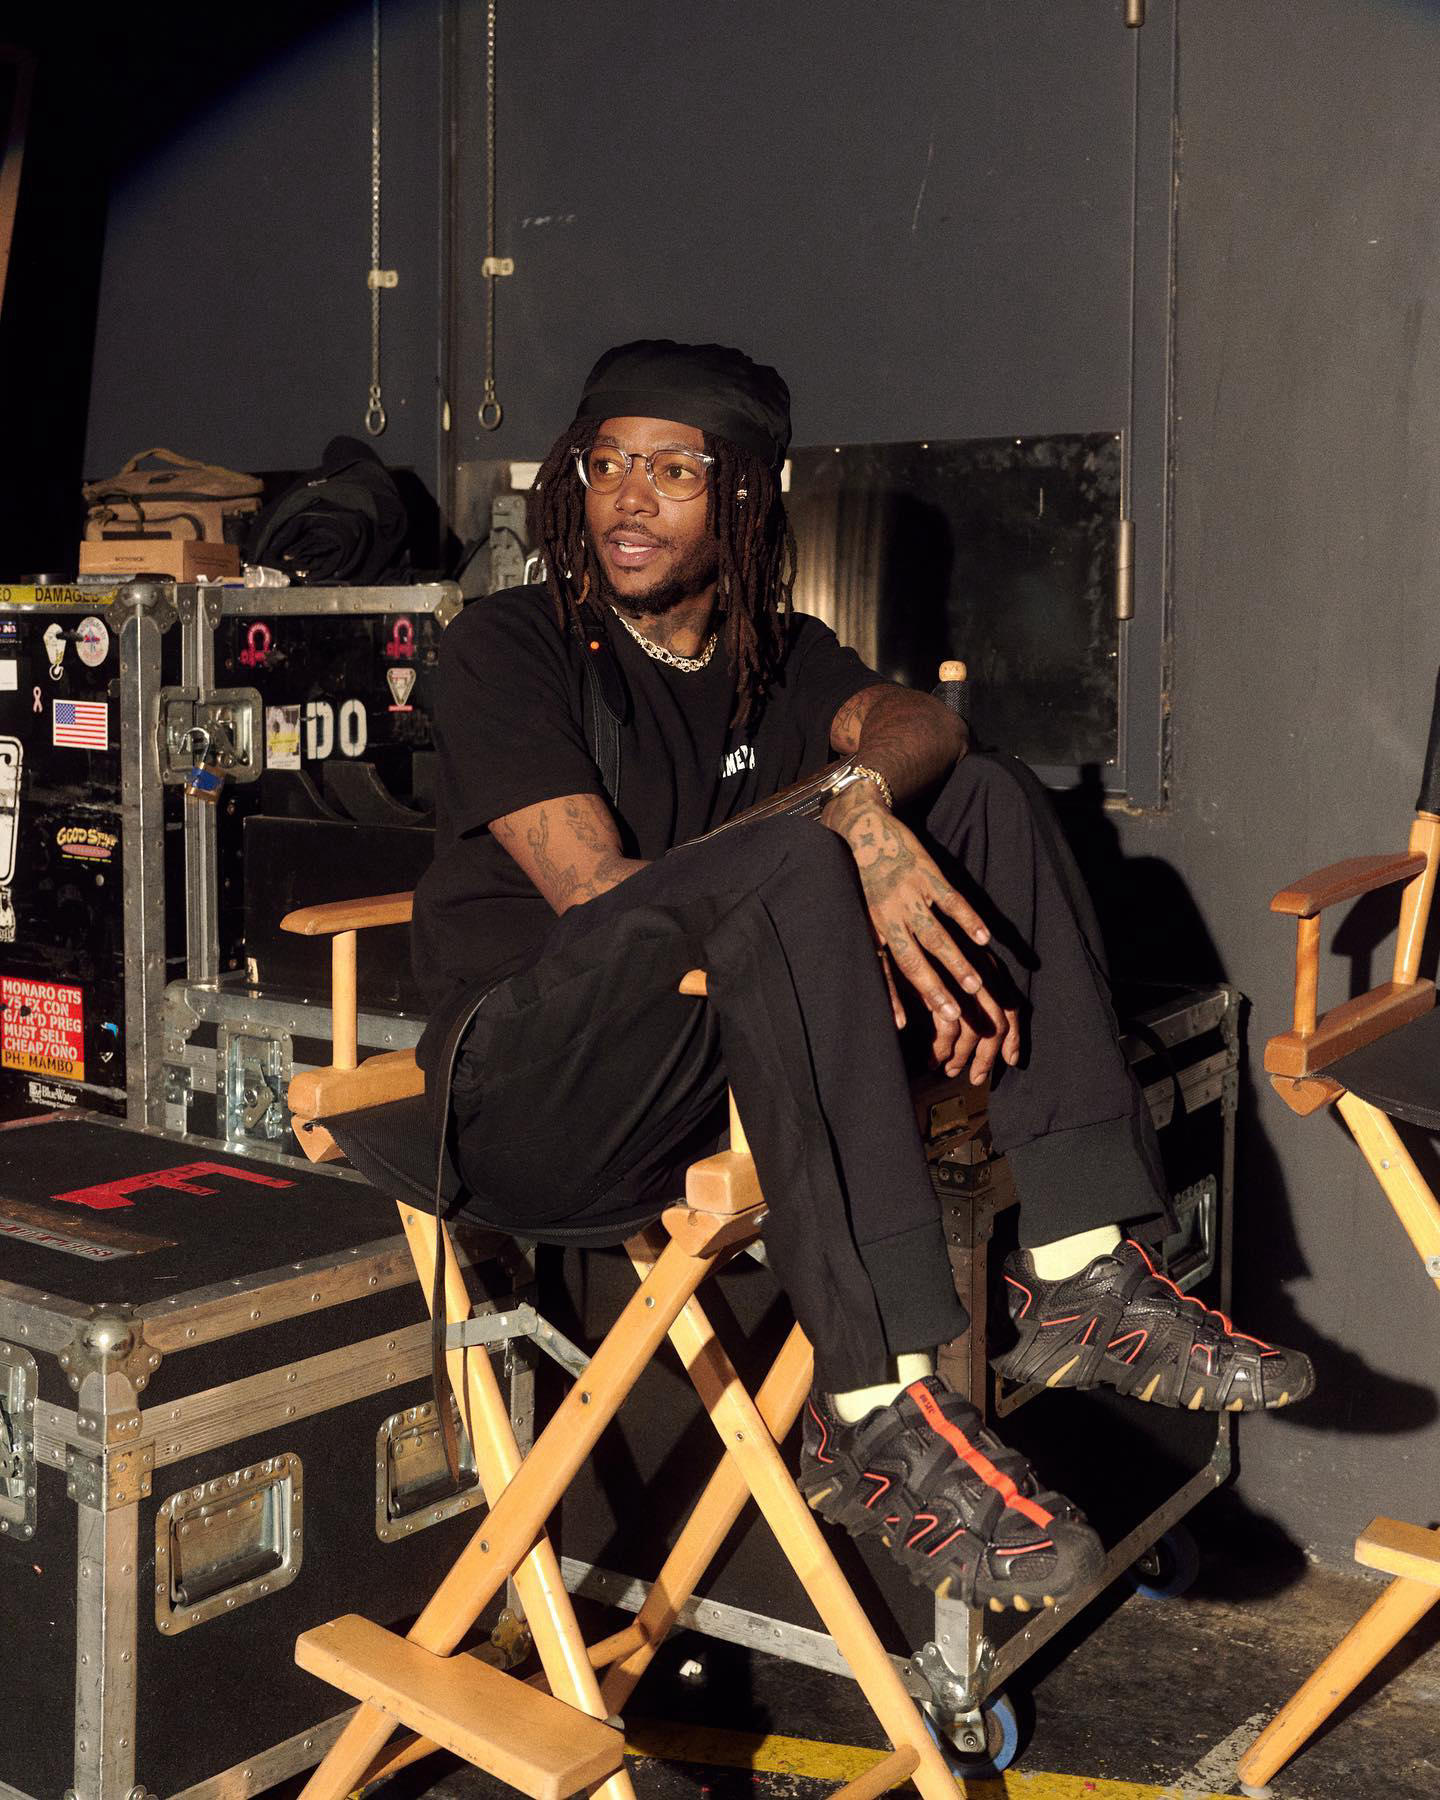 image  1 American Music Awards - Spotted #jidsv at #AMAs rehearsals